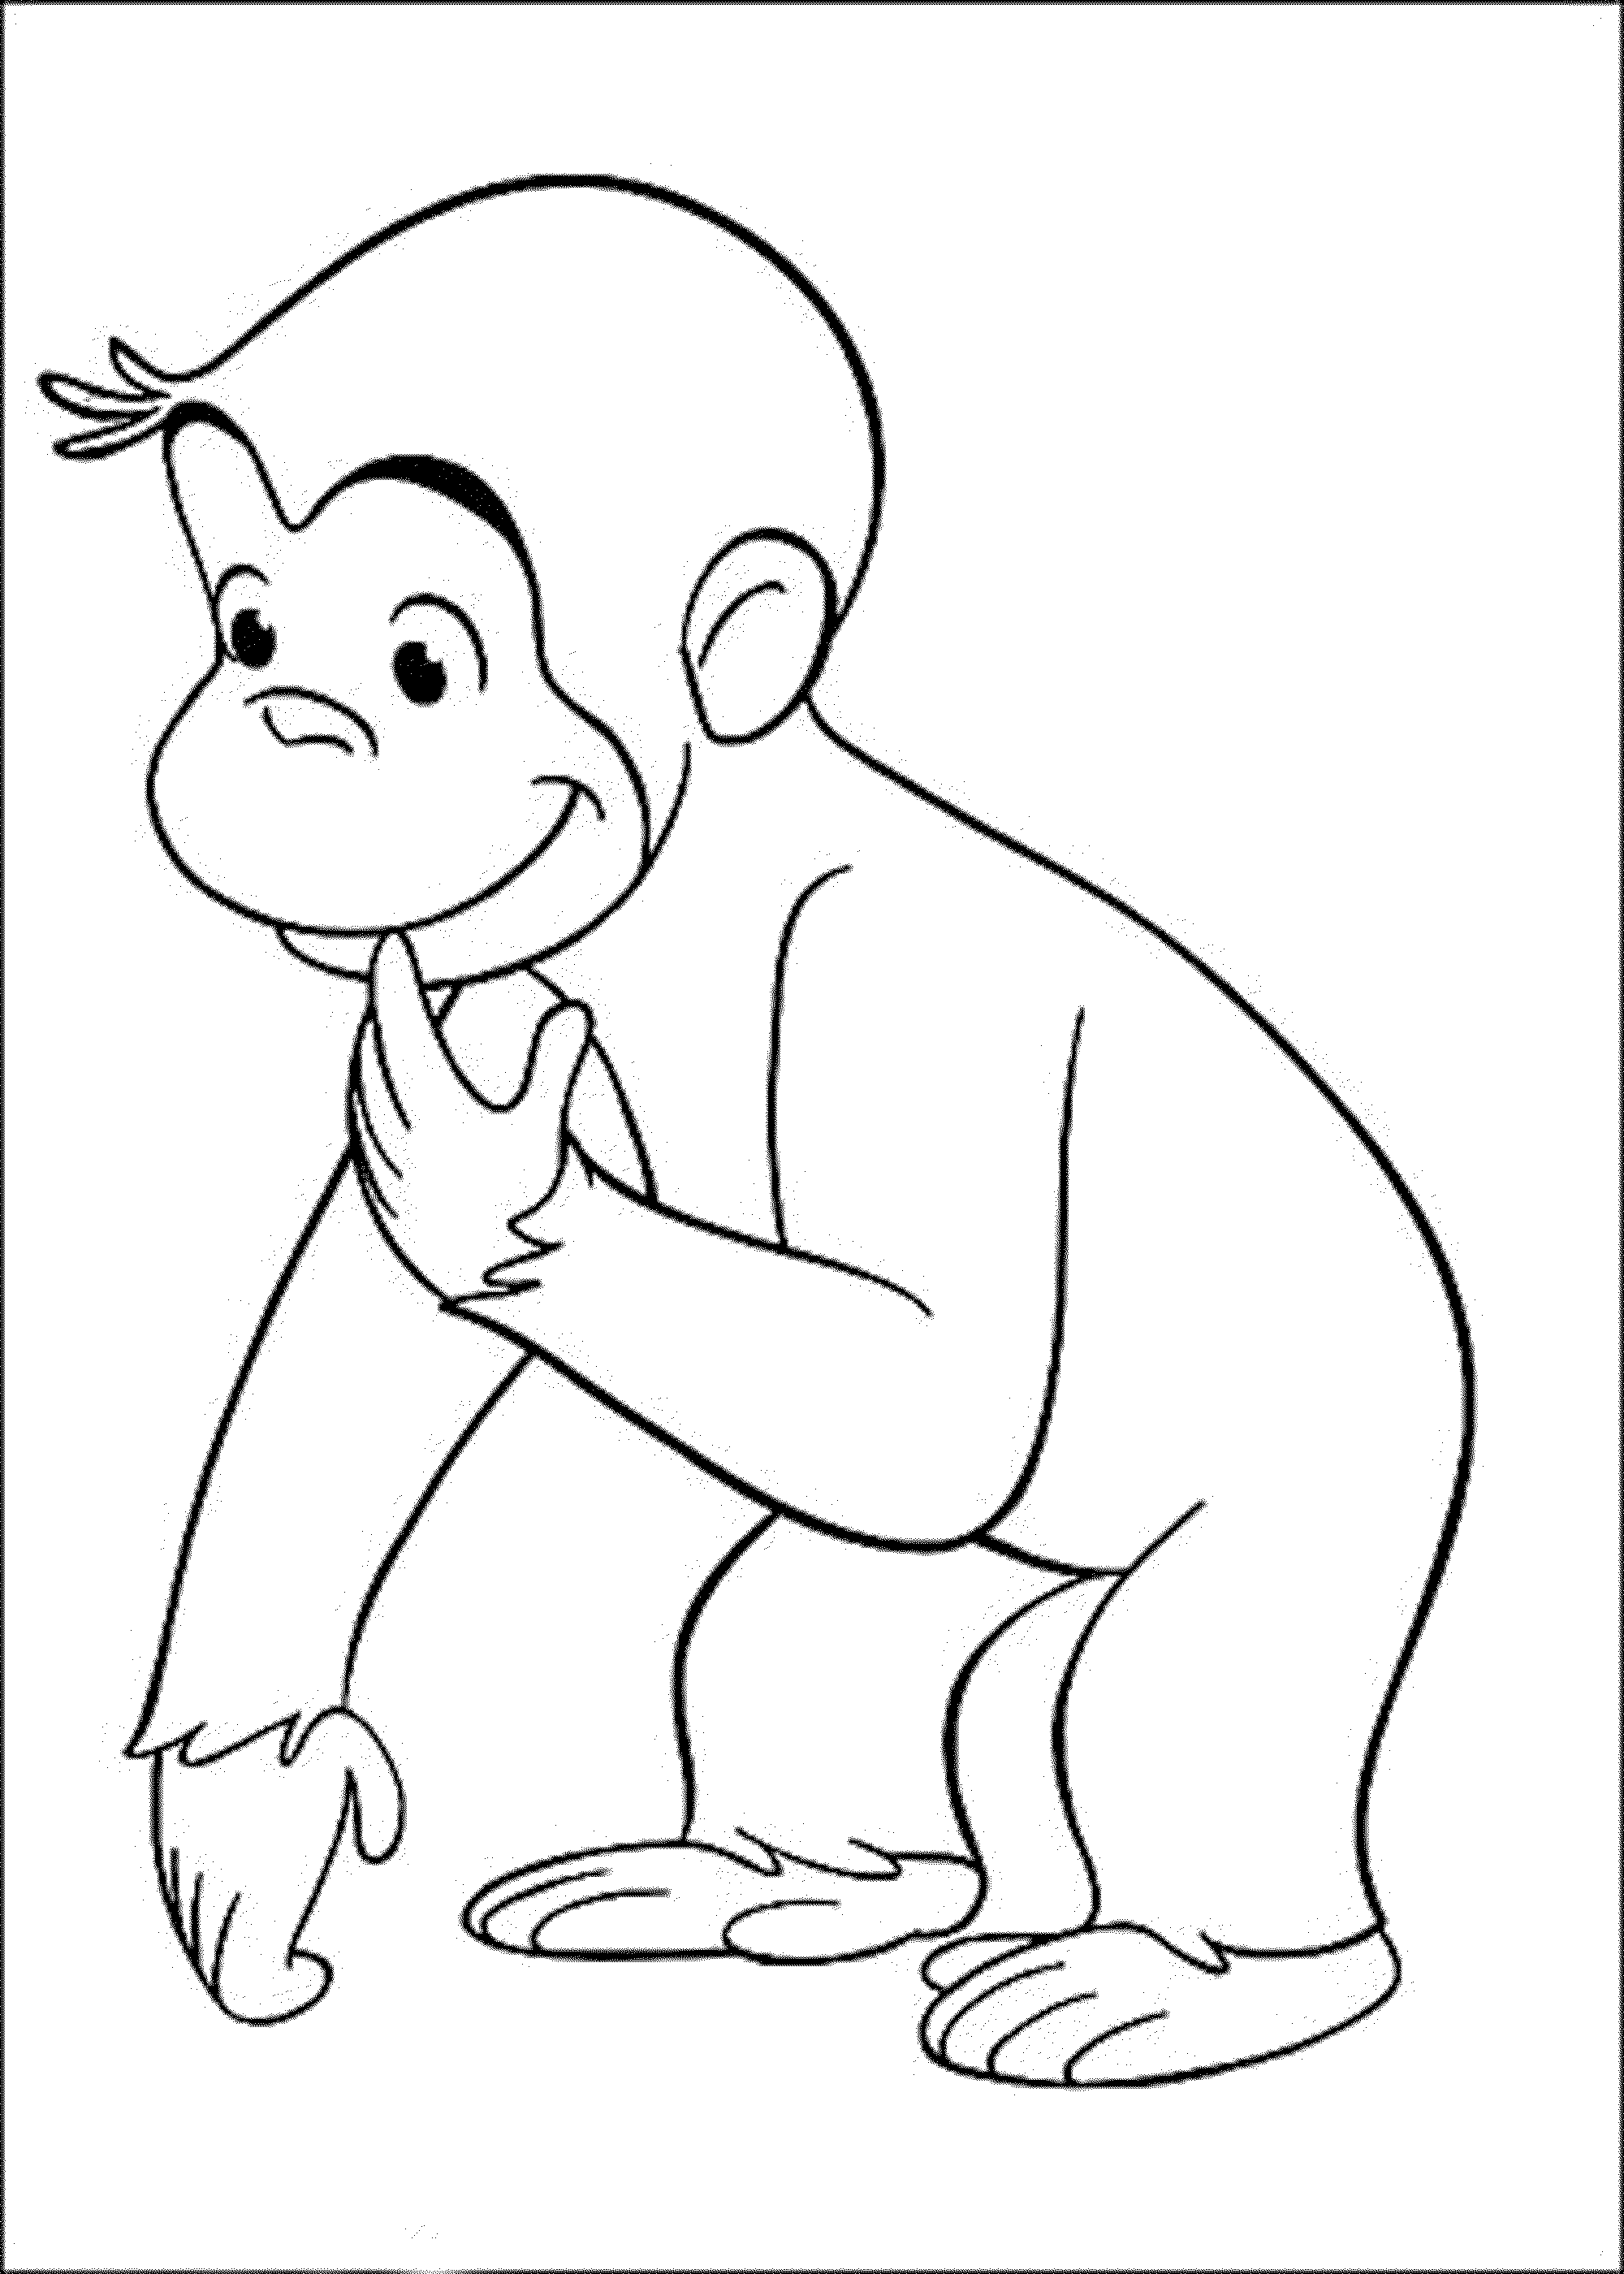 Print Download Curious George Coloring Pages to Stimulate Kids